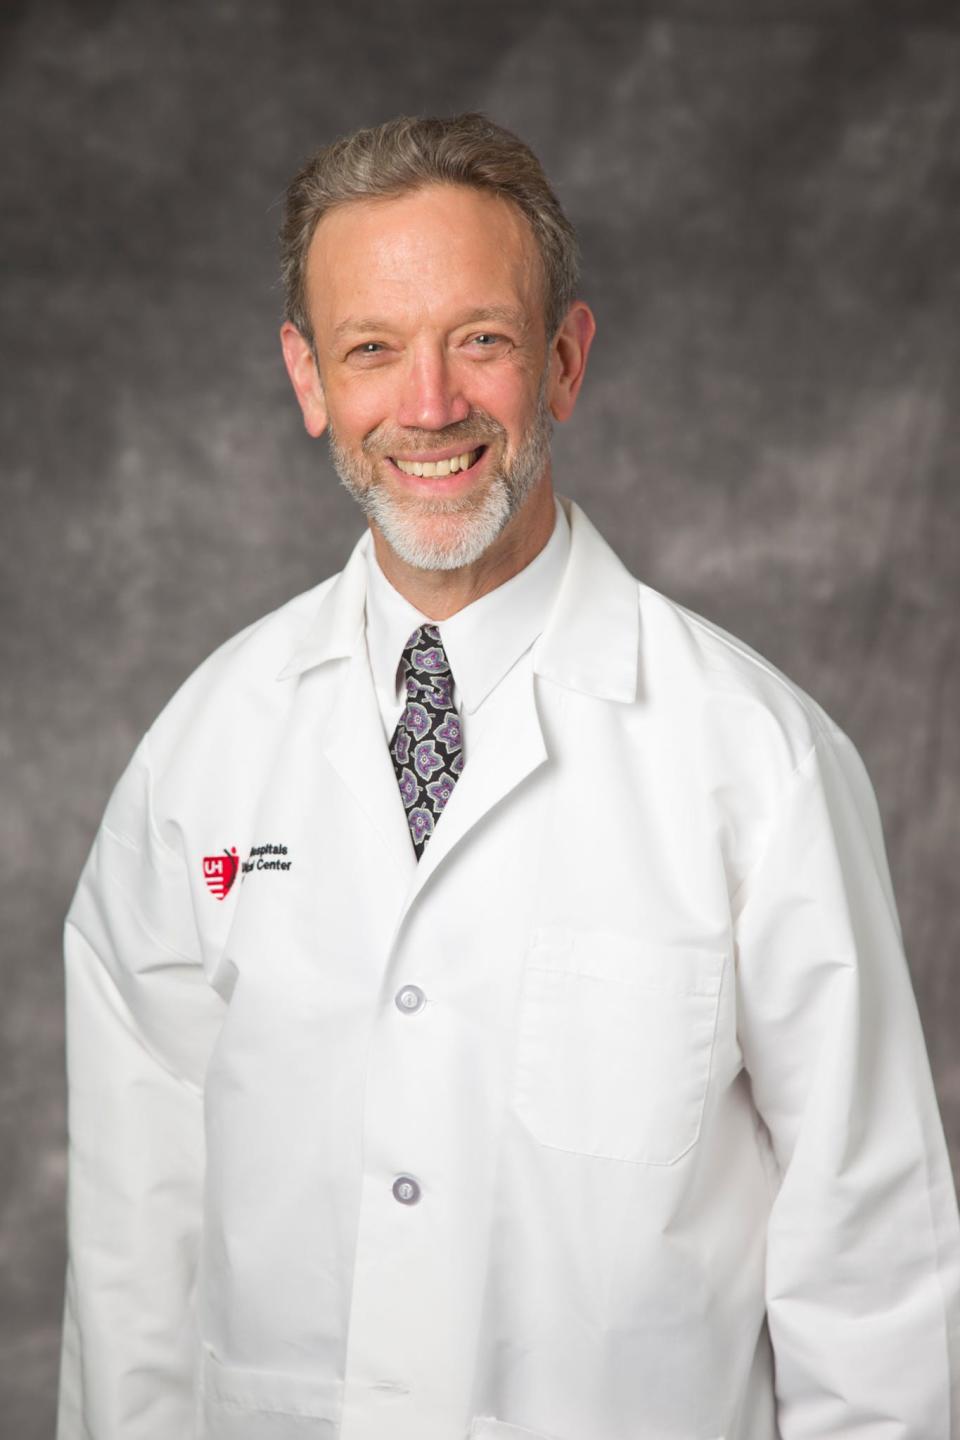 Dr. Max Wiznitzer is division chief of pediatric neurology at University Hospitals Rainbow Babies and Children’s Hospital as well as a professor at Case Western Reserve University Medical School.